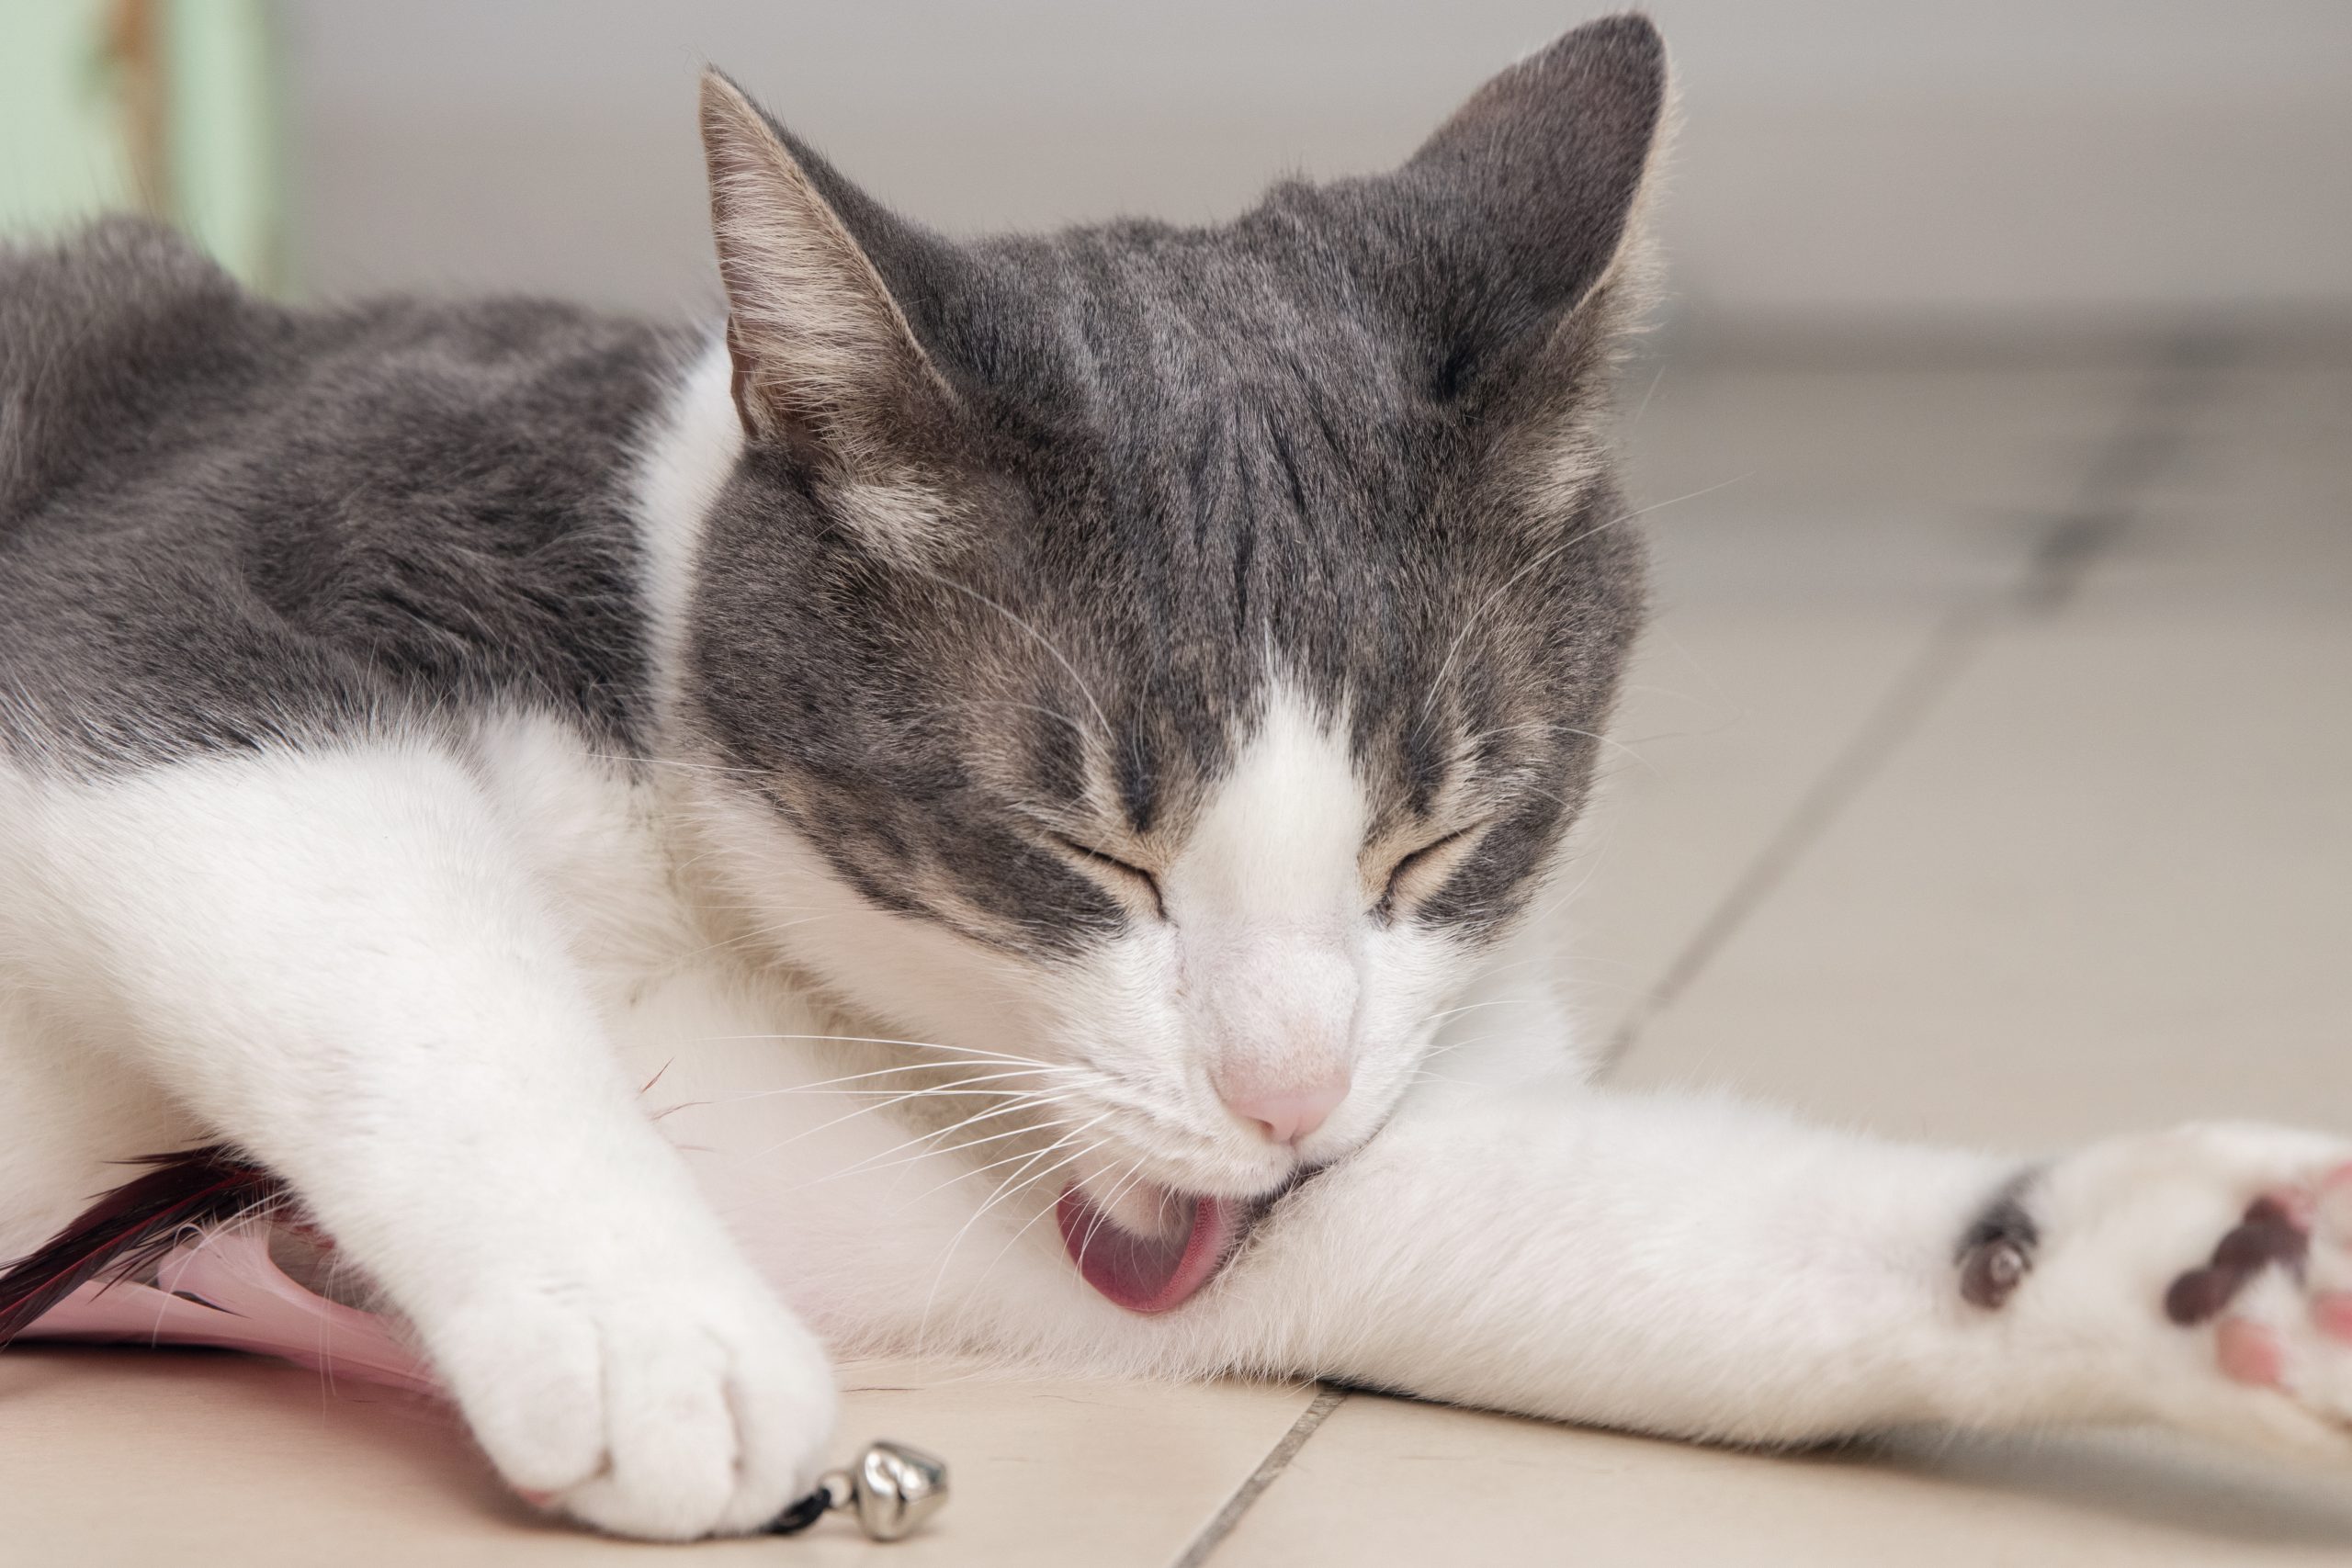 Scratching, grooming, irritated skin, and fur loss are signs that your cat may have fleas.